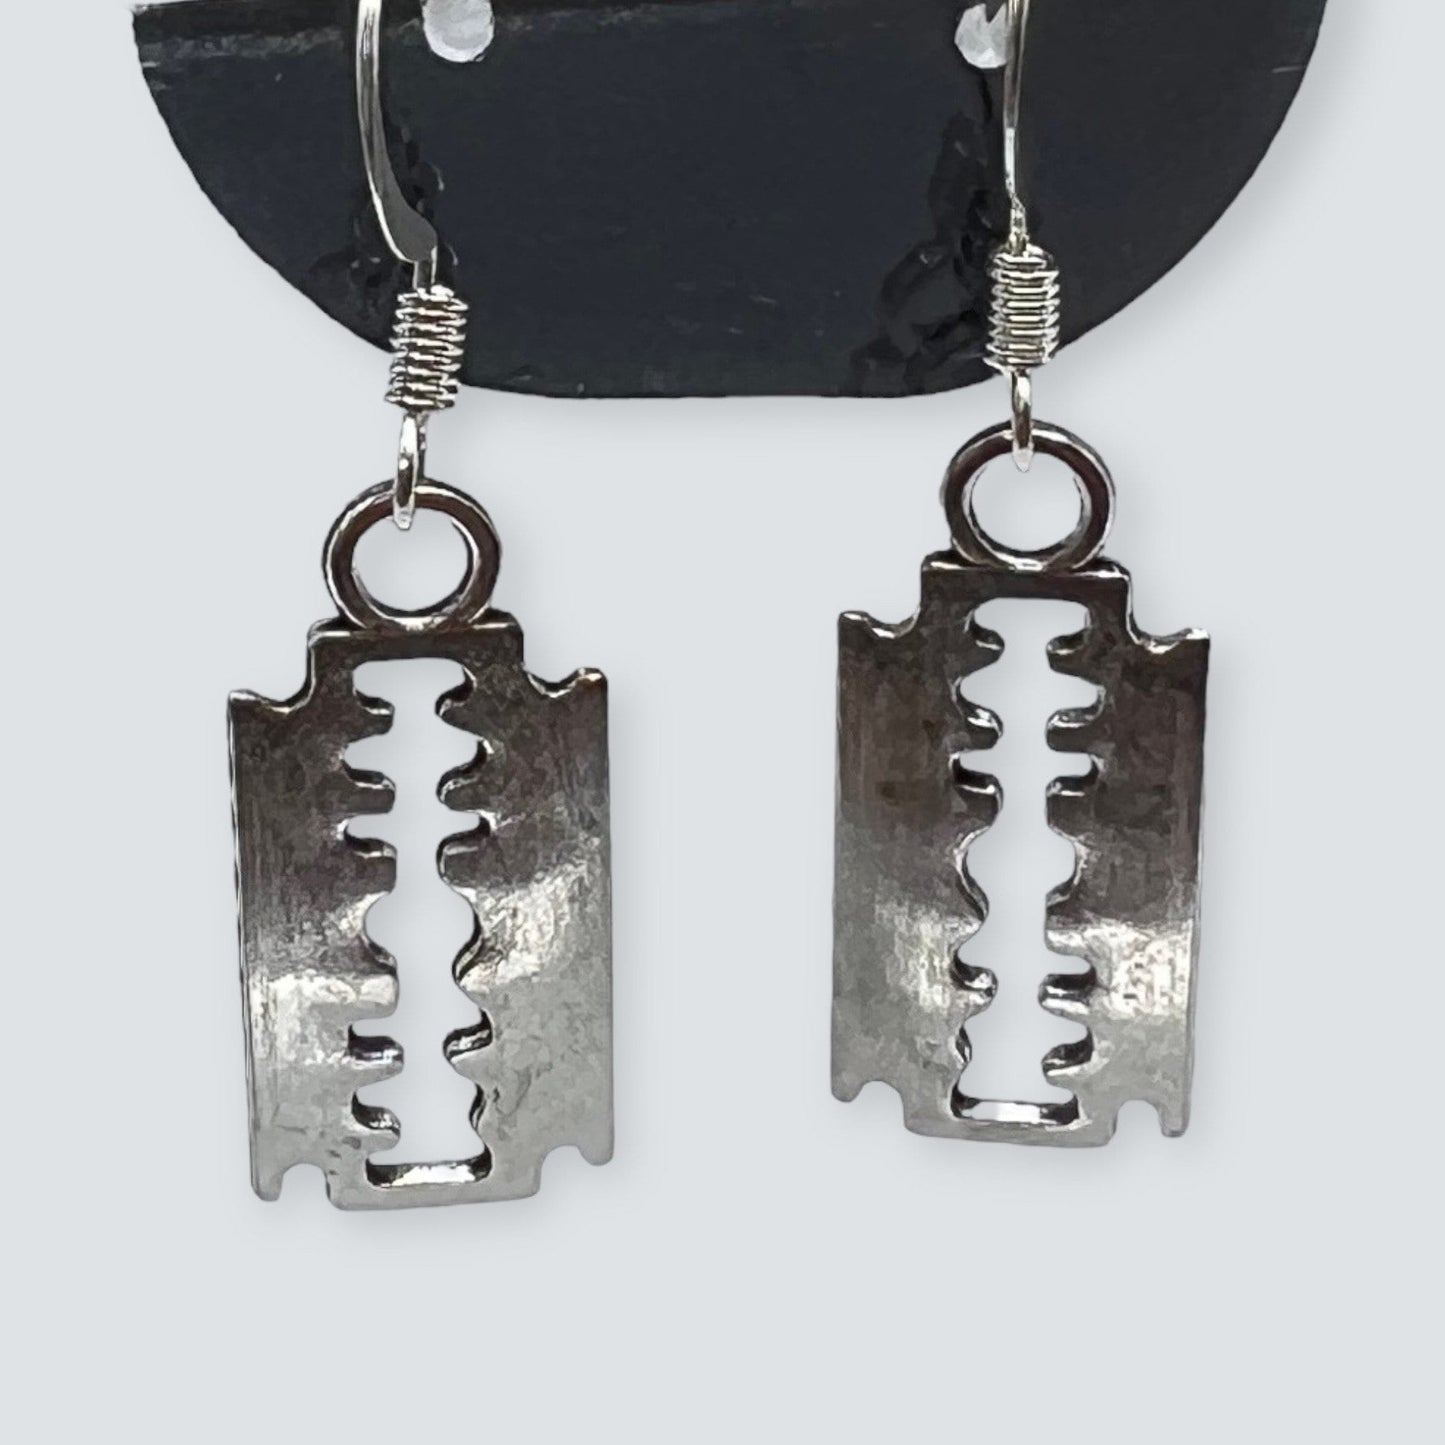 Silver tone razor blade charm earrings, inspired by punk and goth fashion. Displayed on a clear stand.